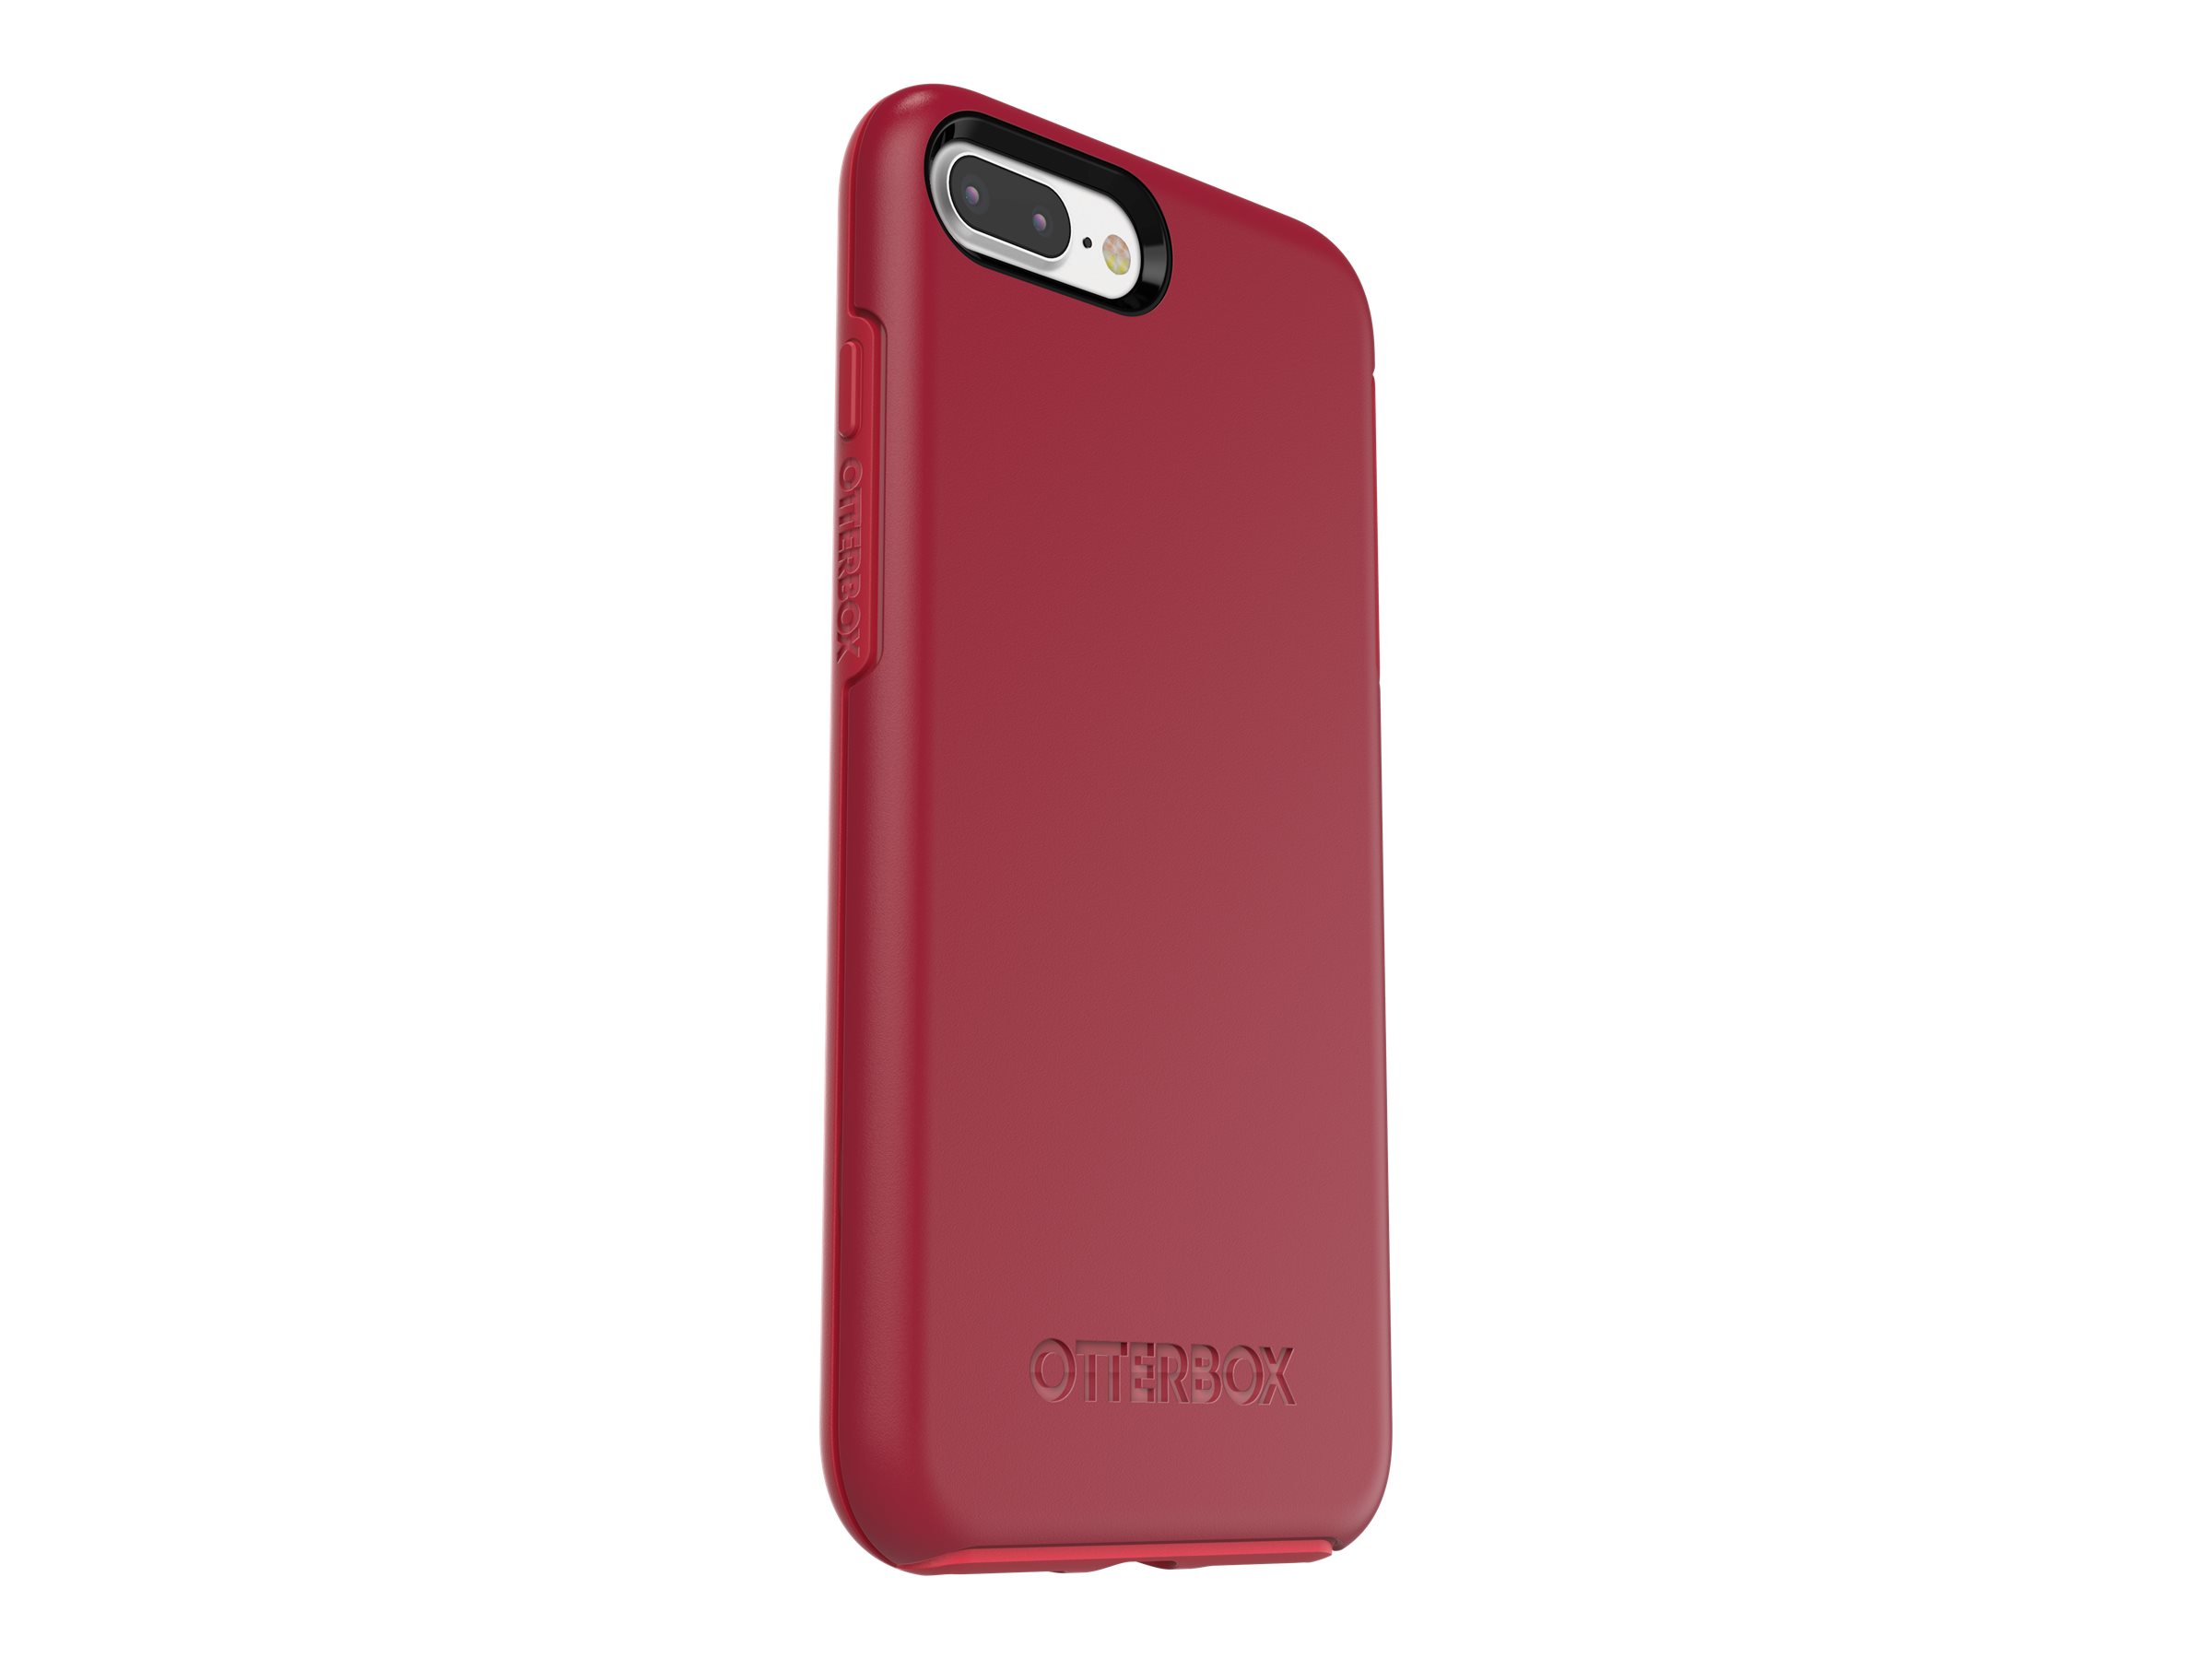 OtterBox Symmetry Series Case for Apple iPhone 7 Plus, Rosso Corsa - image 5 of 8